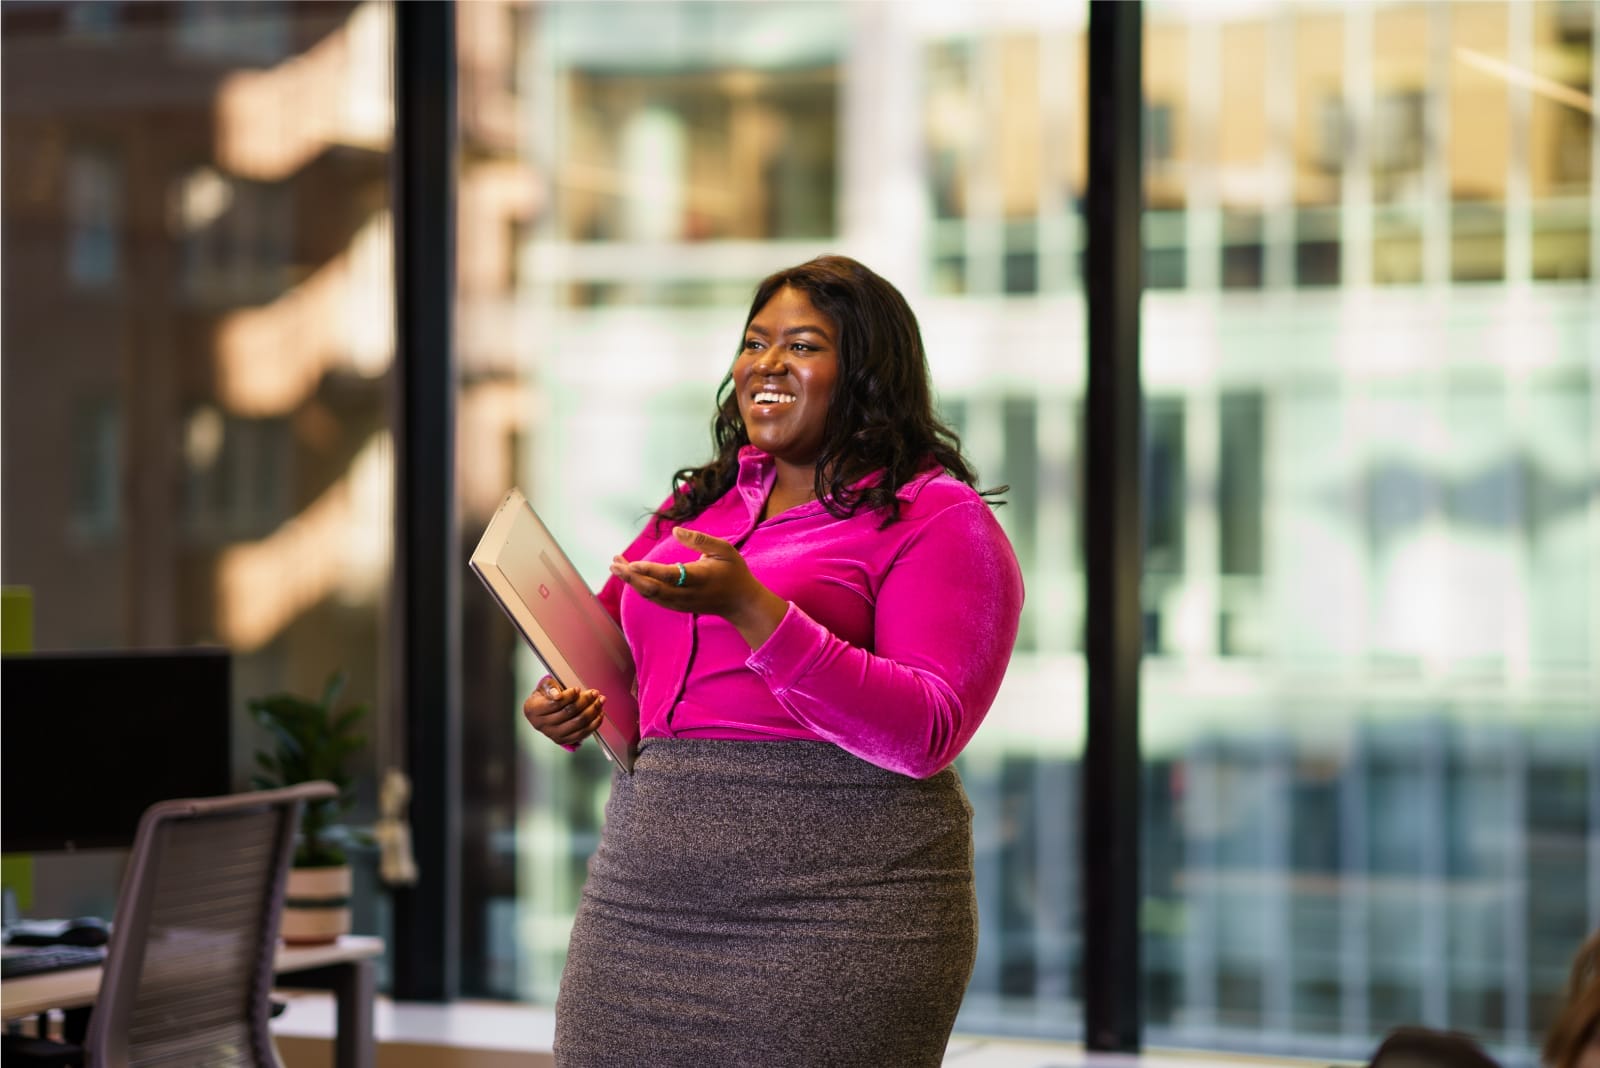 Debbie Namugayi, an Arizona State University School of Sustainability alumna, is a sustainability professional working with industry to create sustainable outcomes. She is now working to make a difference in her role at VOX Global.